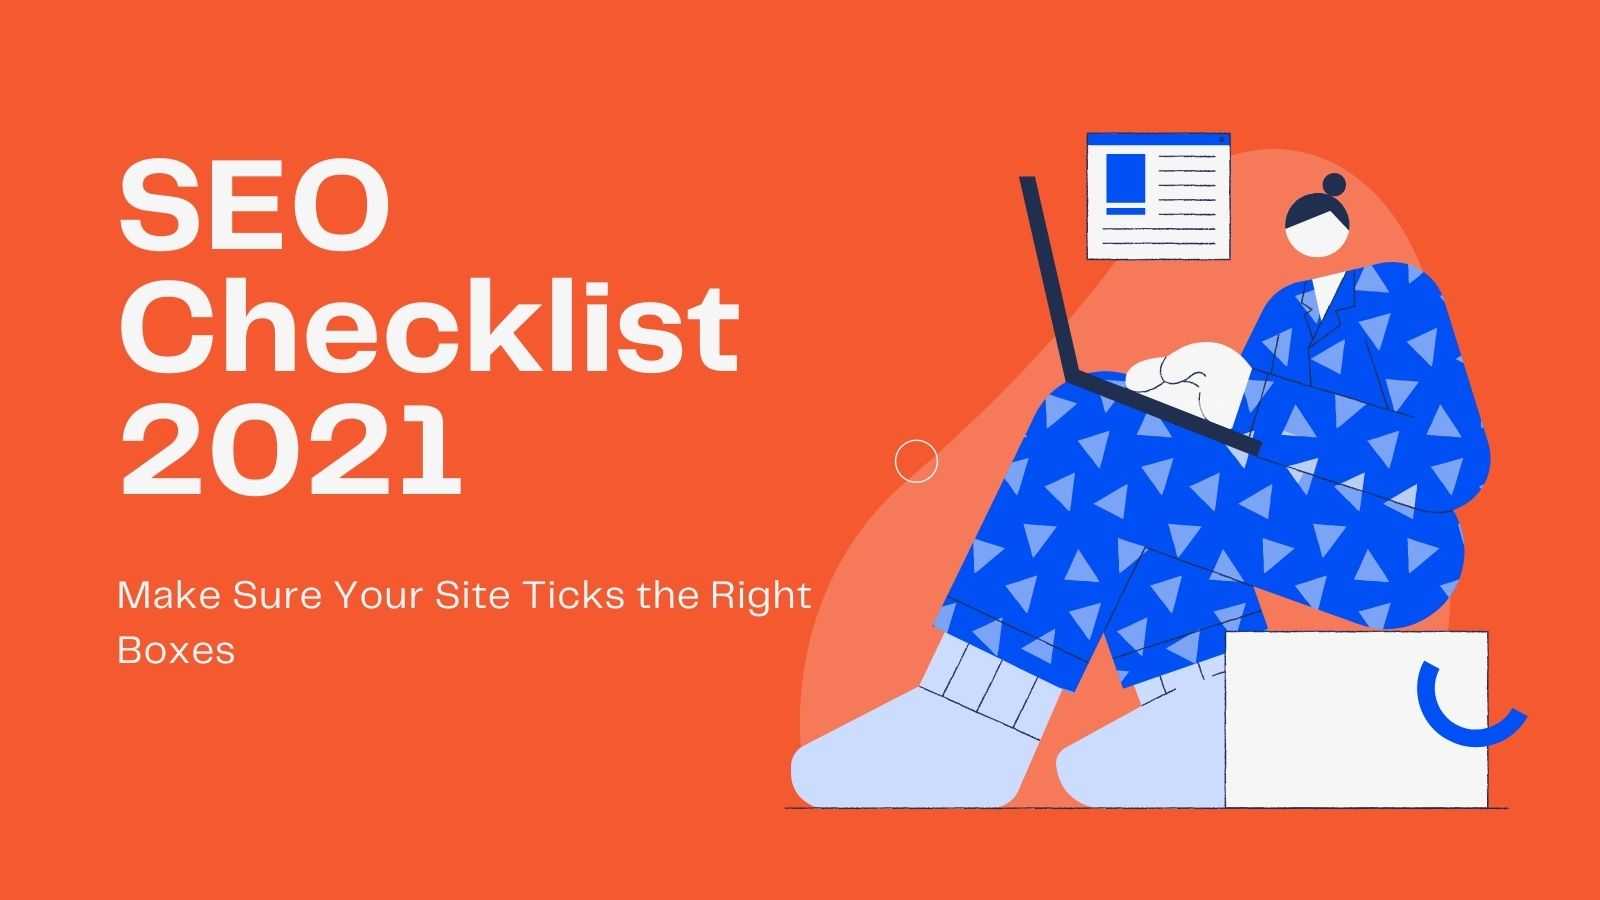 SEO Checklist 2021 to Make Sure Your Site Ticks the Right Boxes